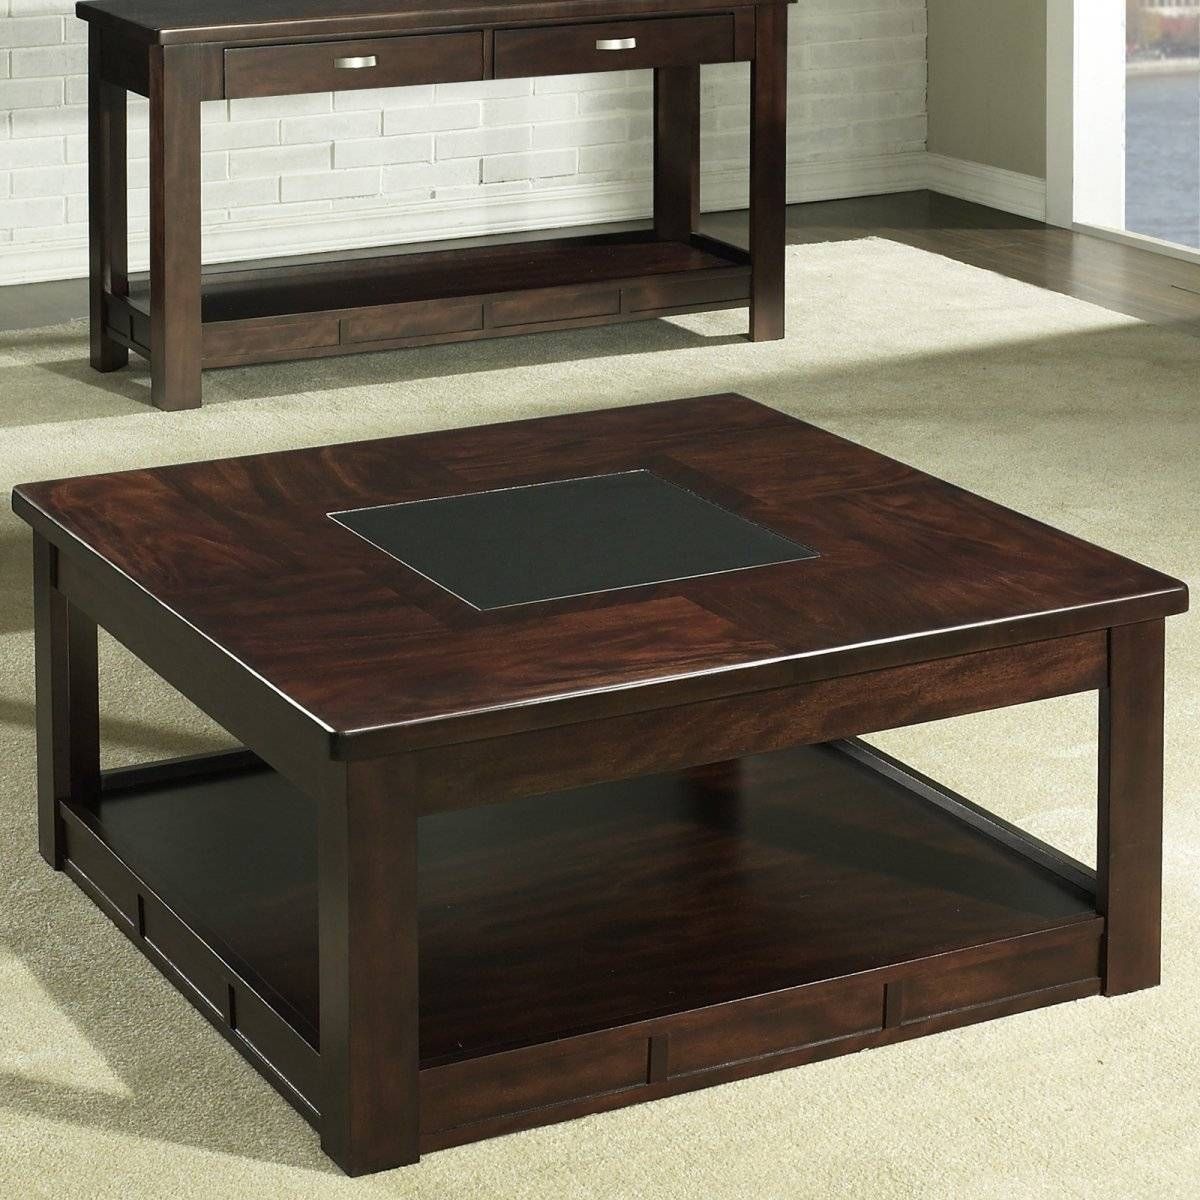 Coffee Table: Chic Small Square Coffee Table Design Ideas Square Inside Square Dark Wood Coffee Table (View 19 of 30)